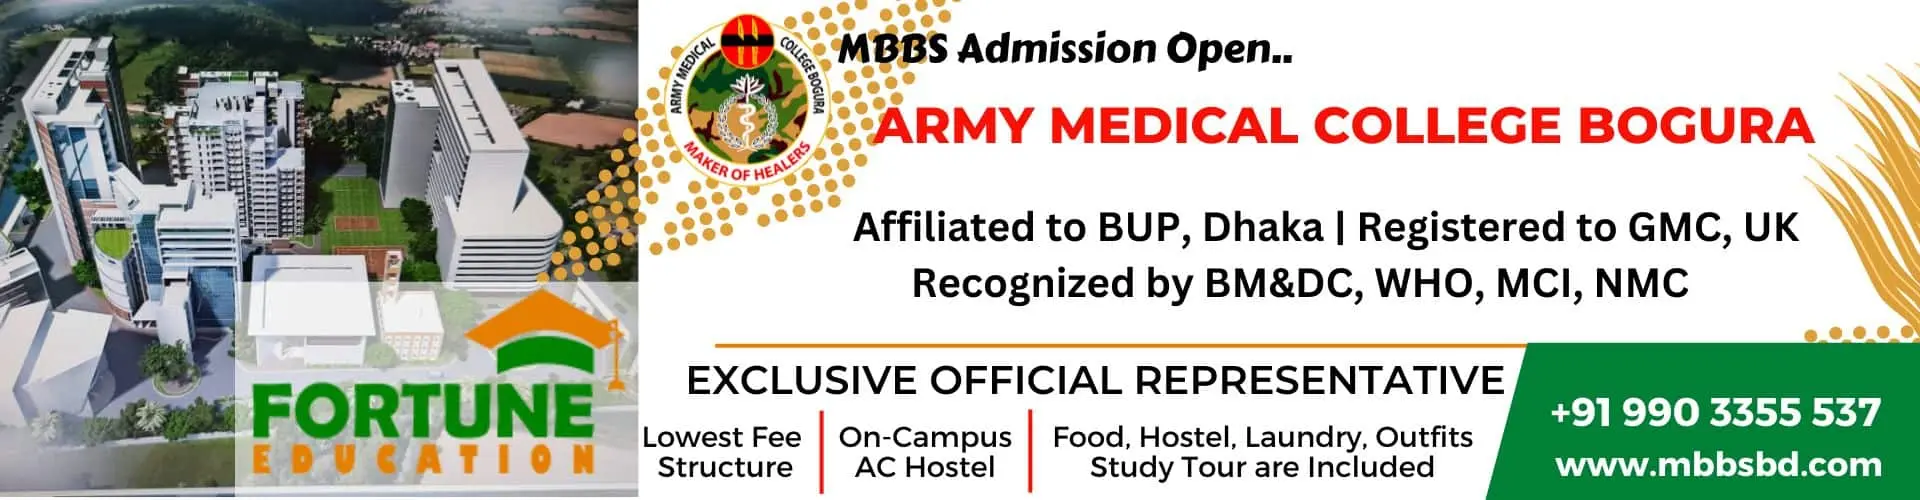 Army Medical College Bogura Wide Home Banner